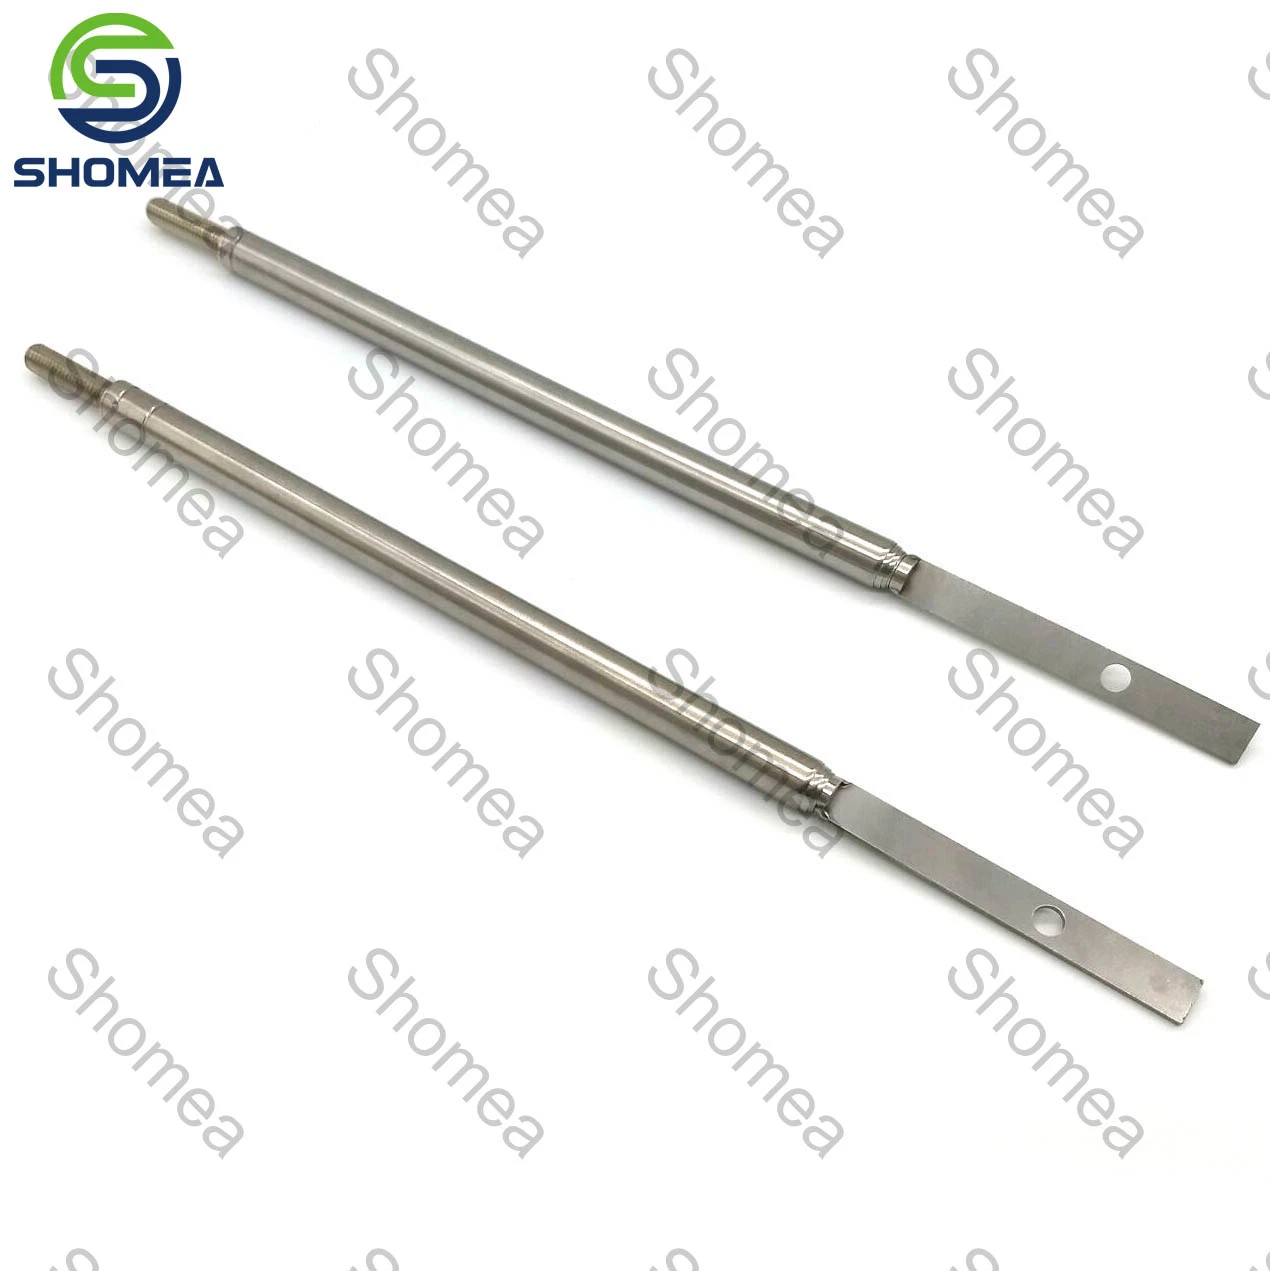 Shomea Customized 304/316 Stainless Steel Telescopic Pole Welded a Plate